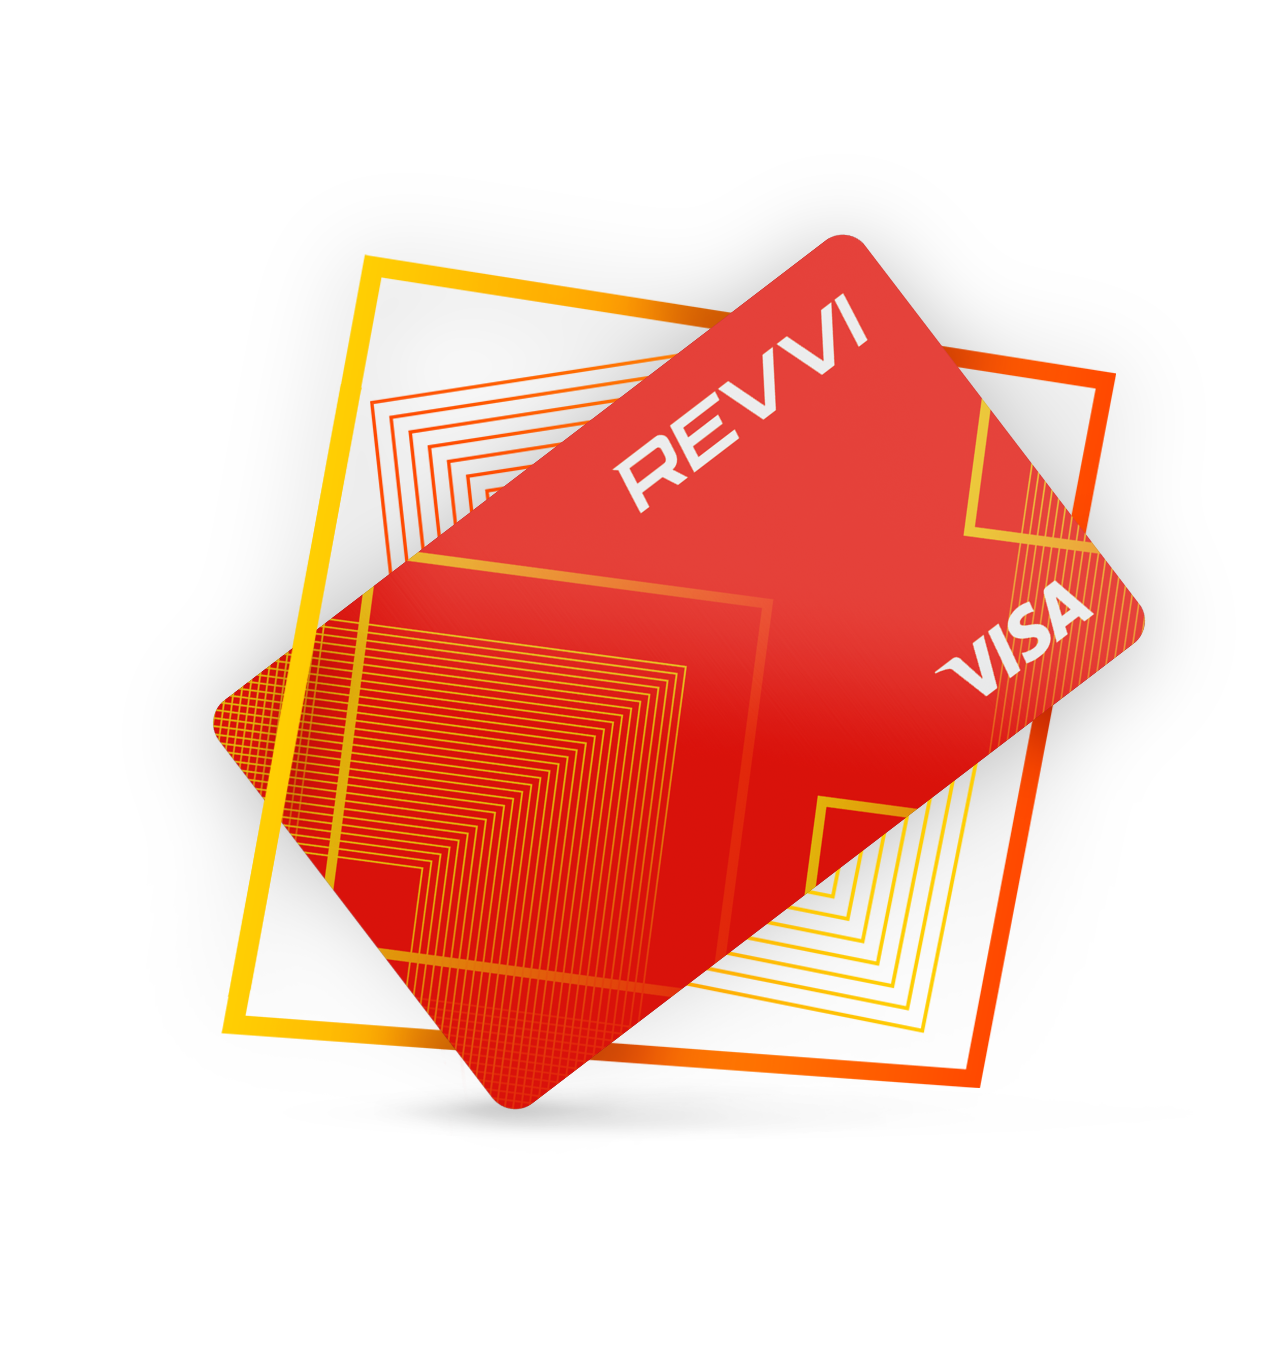 Revvi Credit Cards in orange and pink designs. Revvi Card is a credit card for underserved consumers with imperfect credit.